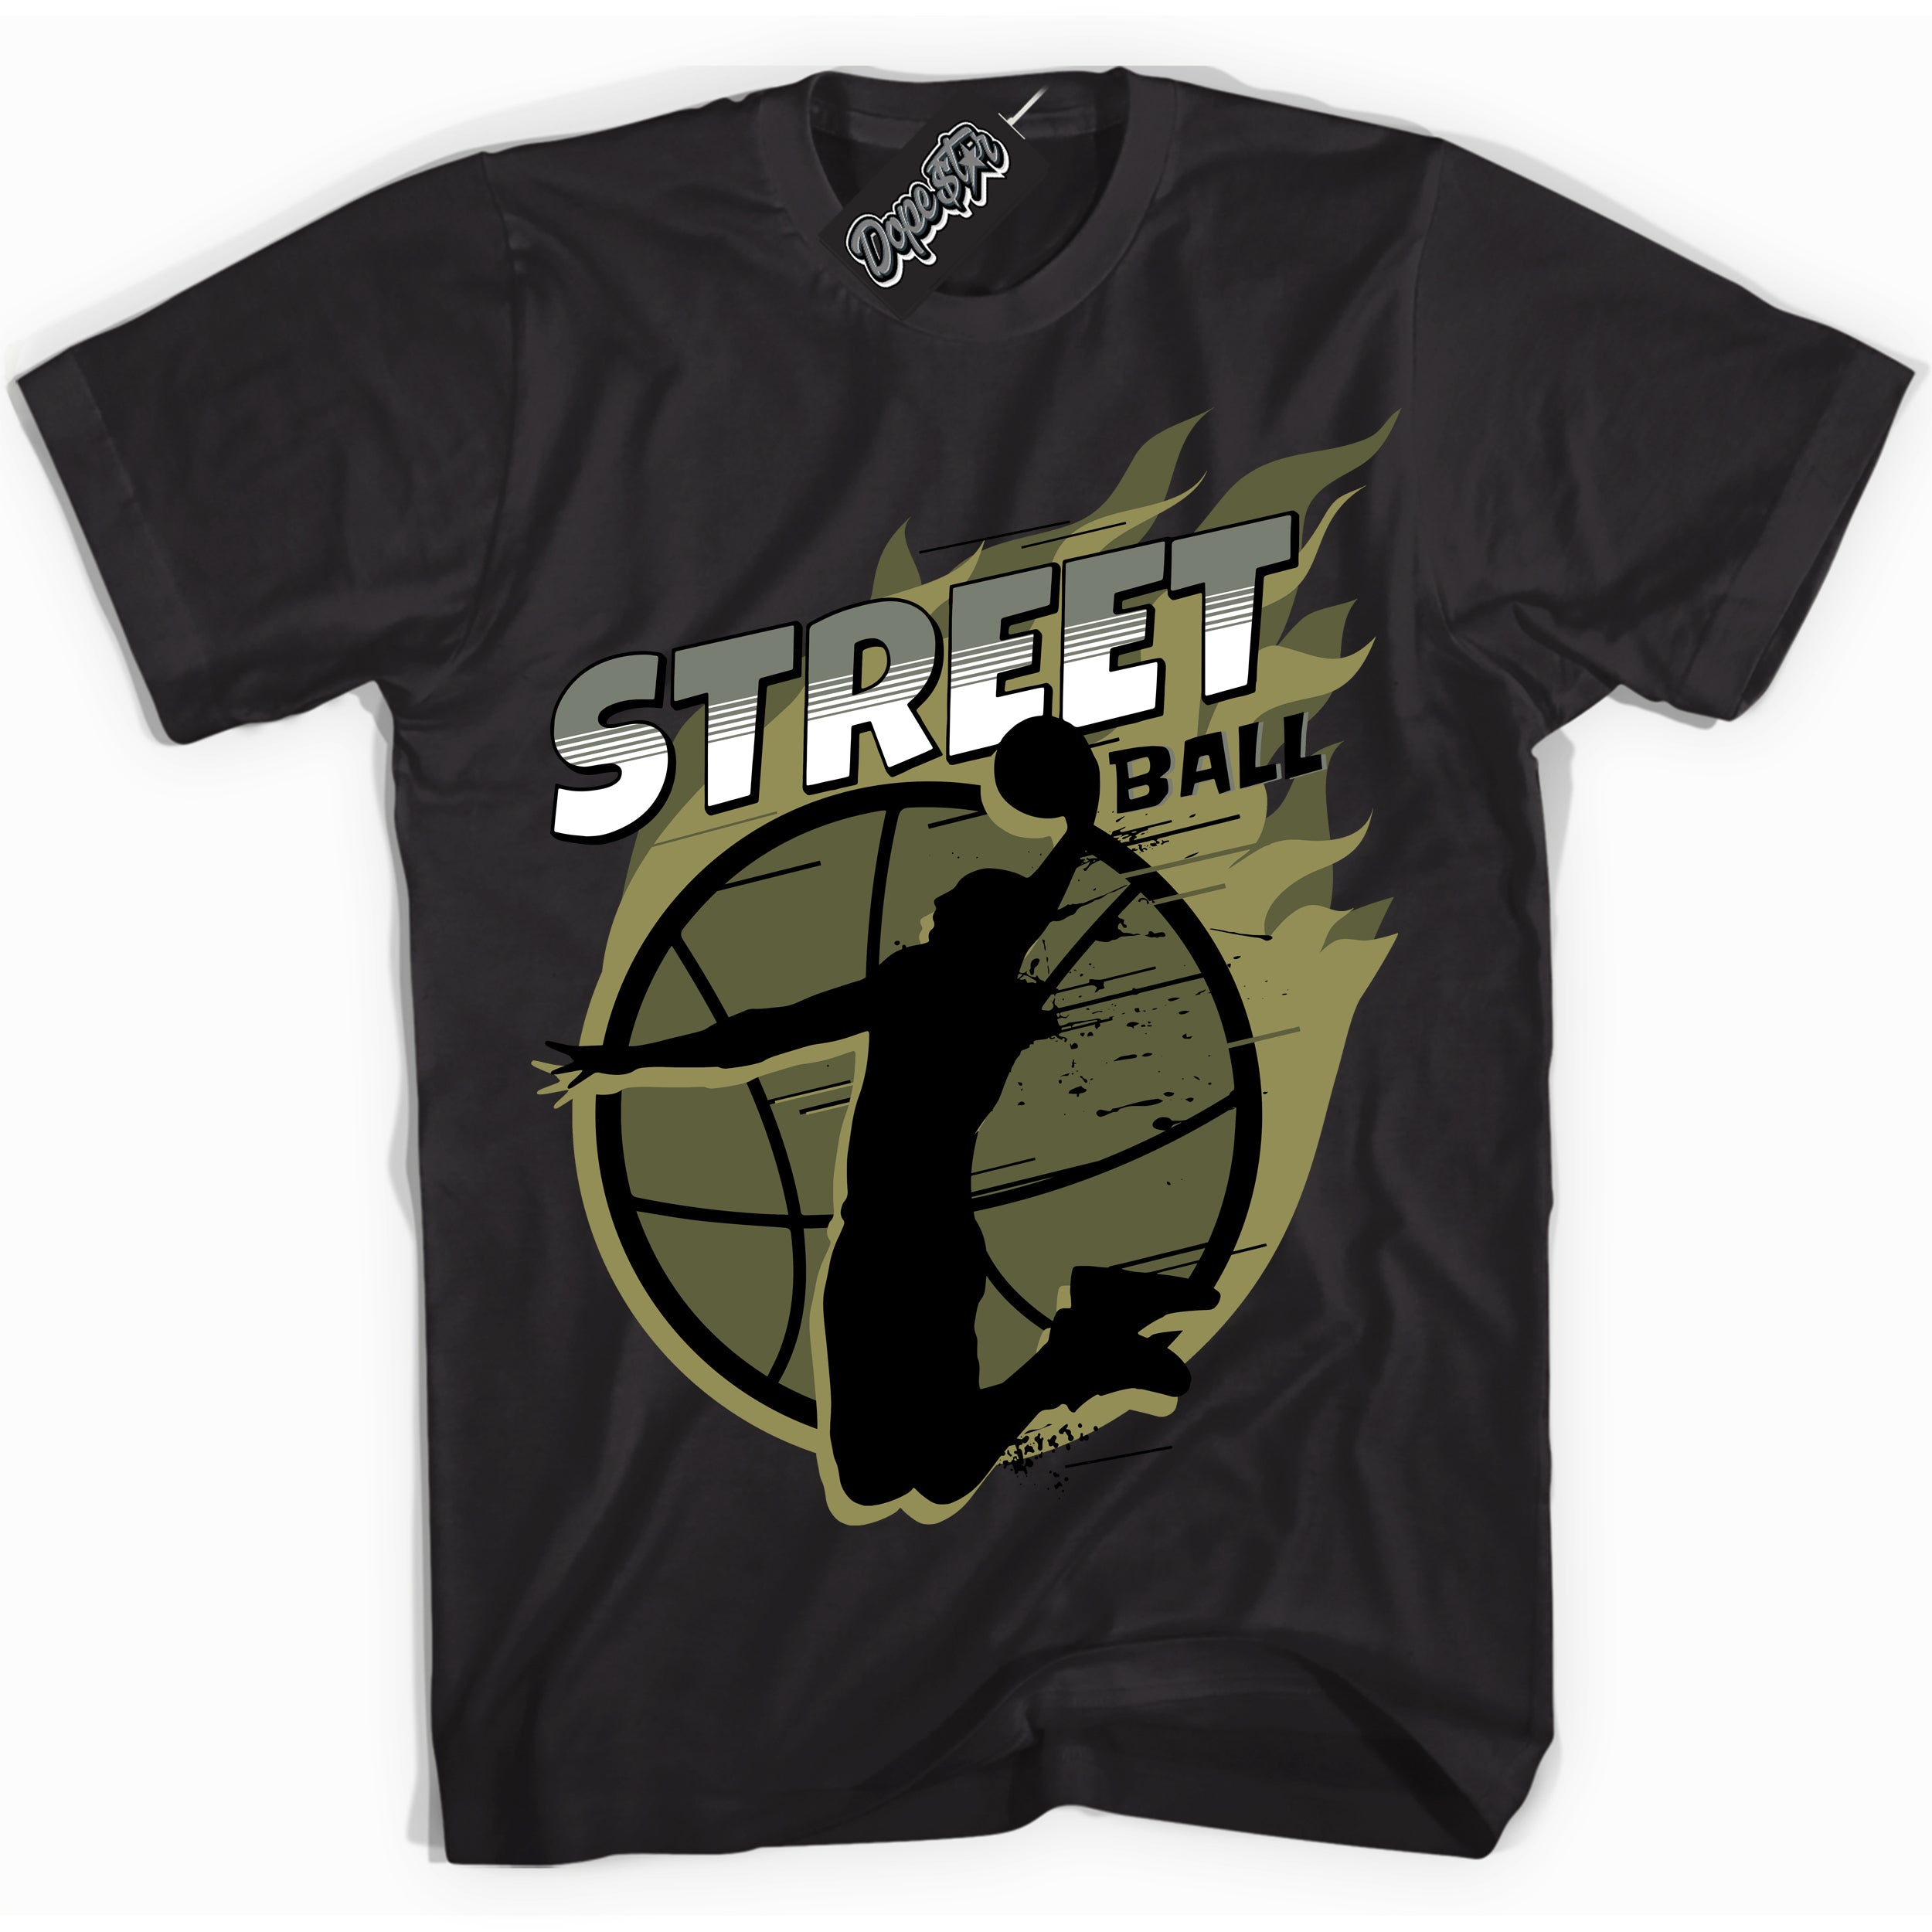 Cool Black graphic tee with “ Street Ball ” print, that perfectly matches Craft Olive 4s sneakers 